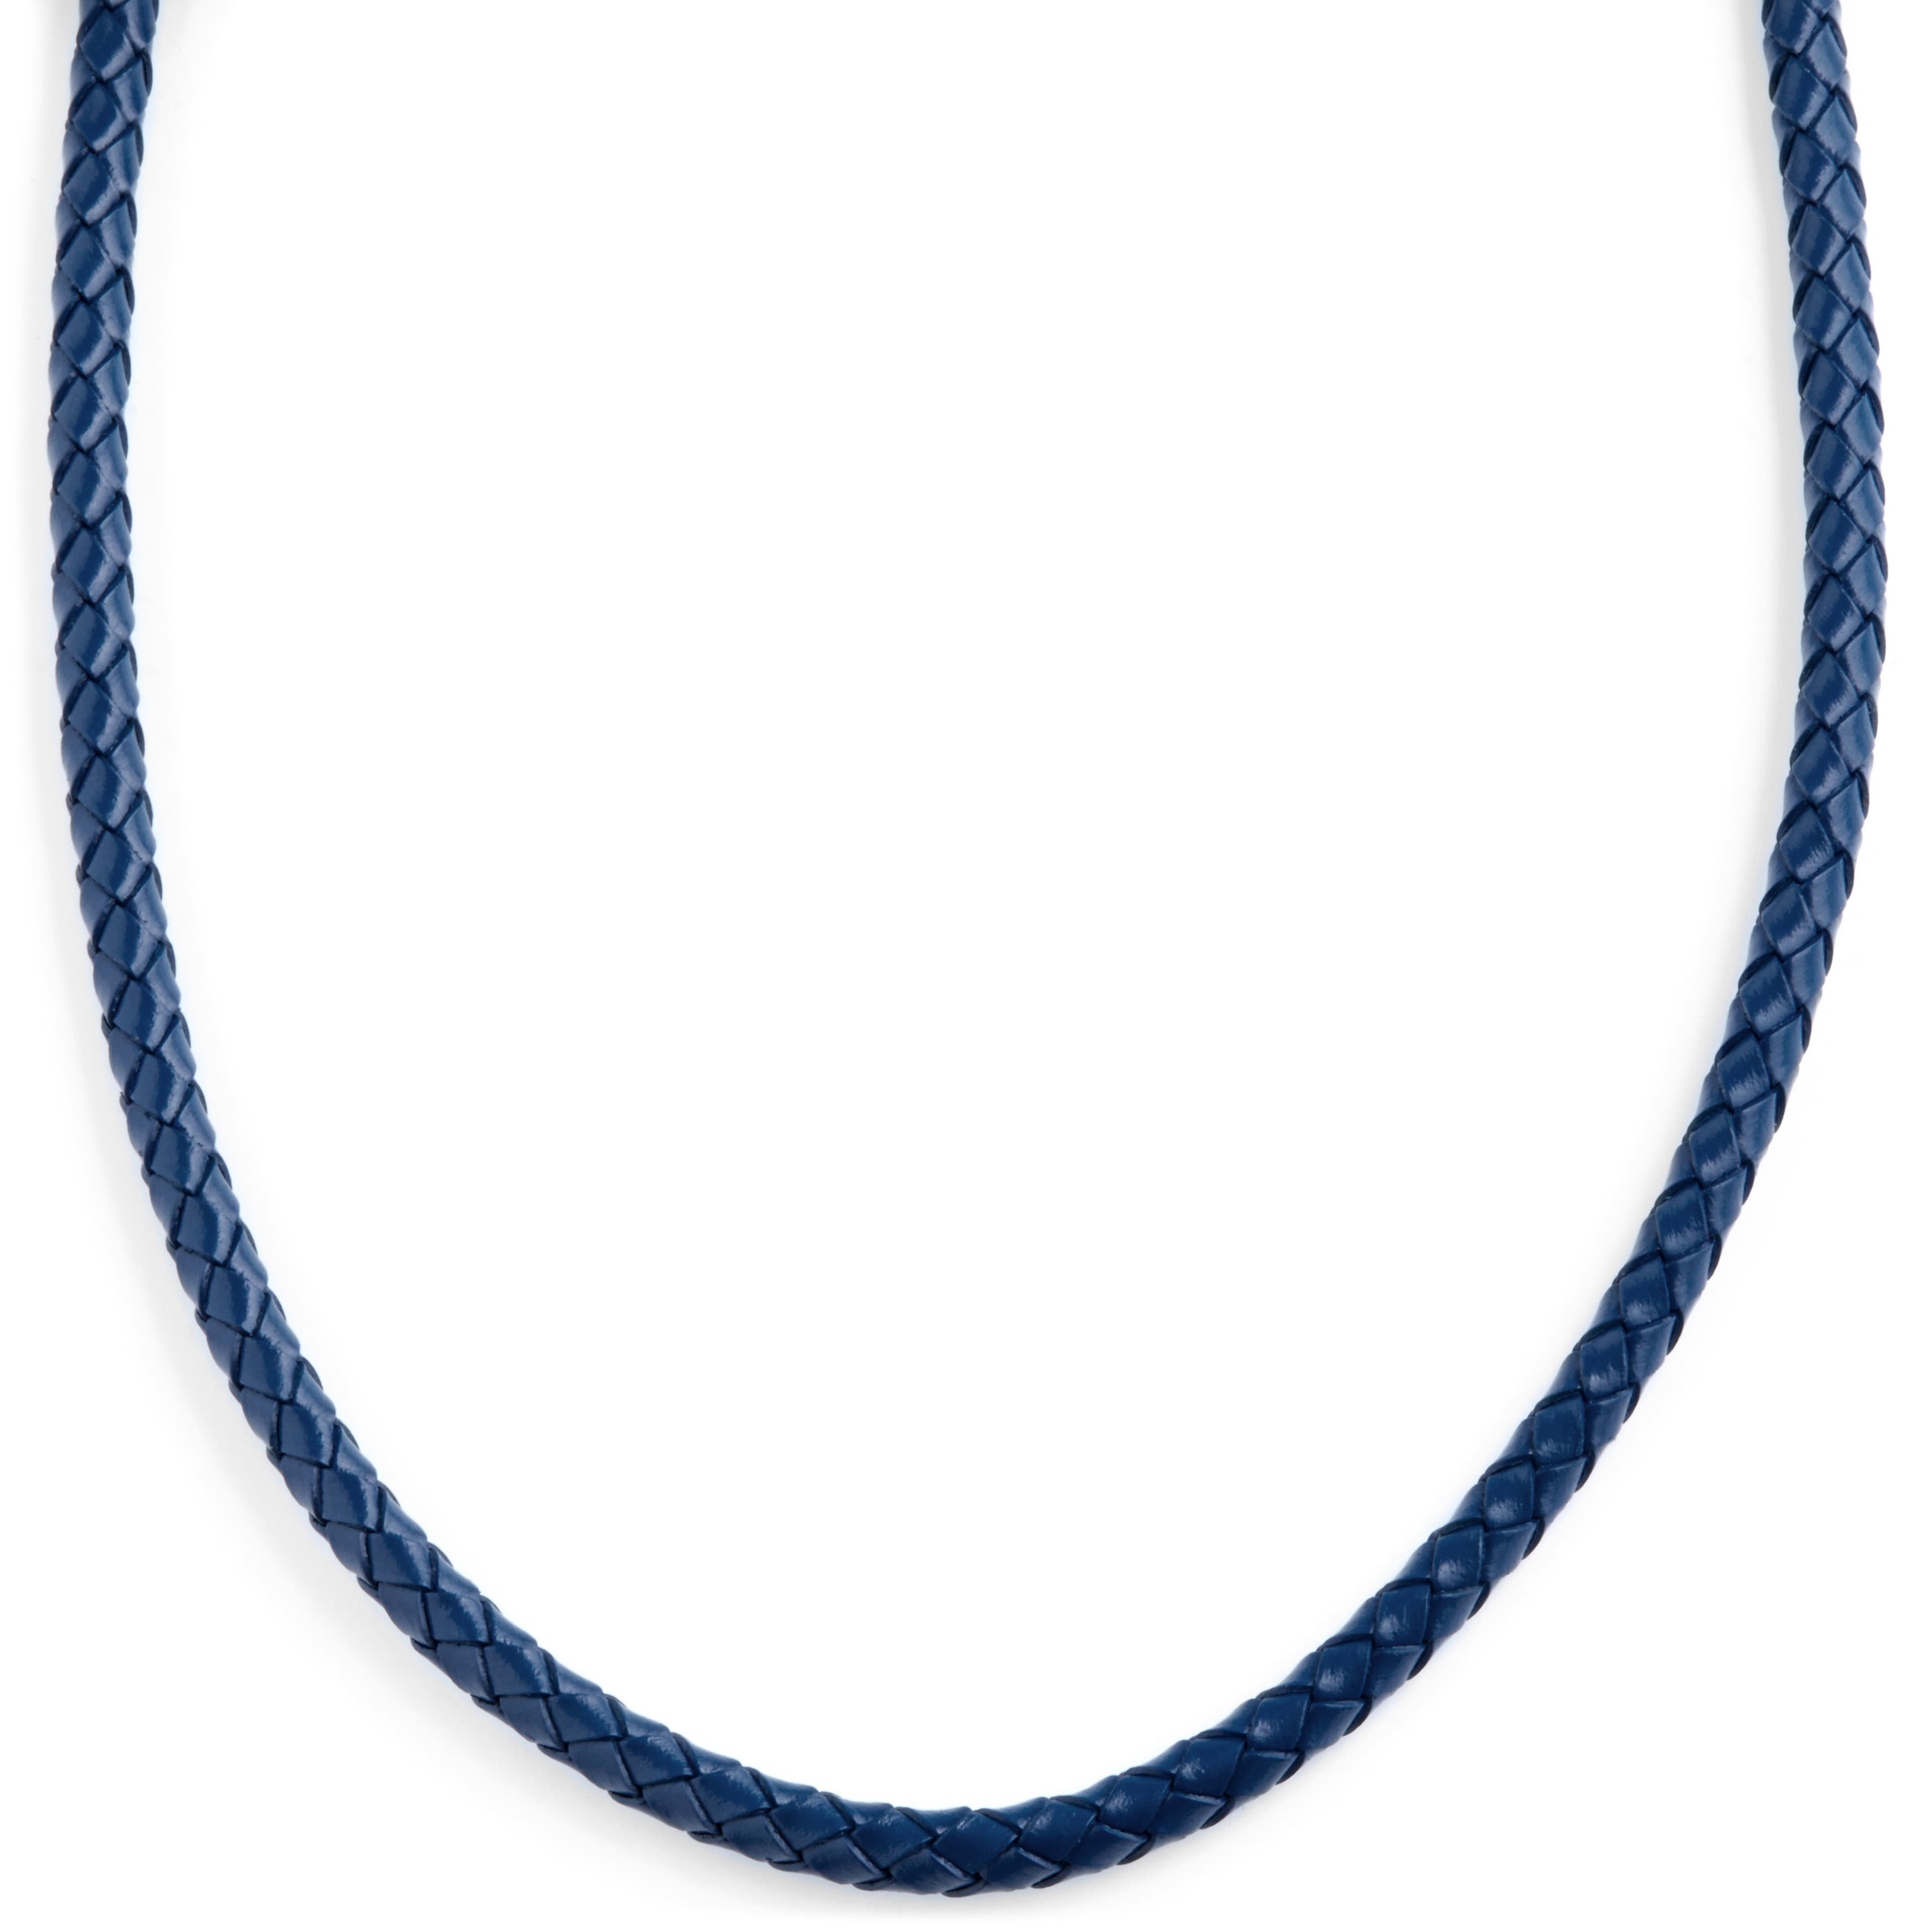 5 mm Blue Leather Woven Necklace